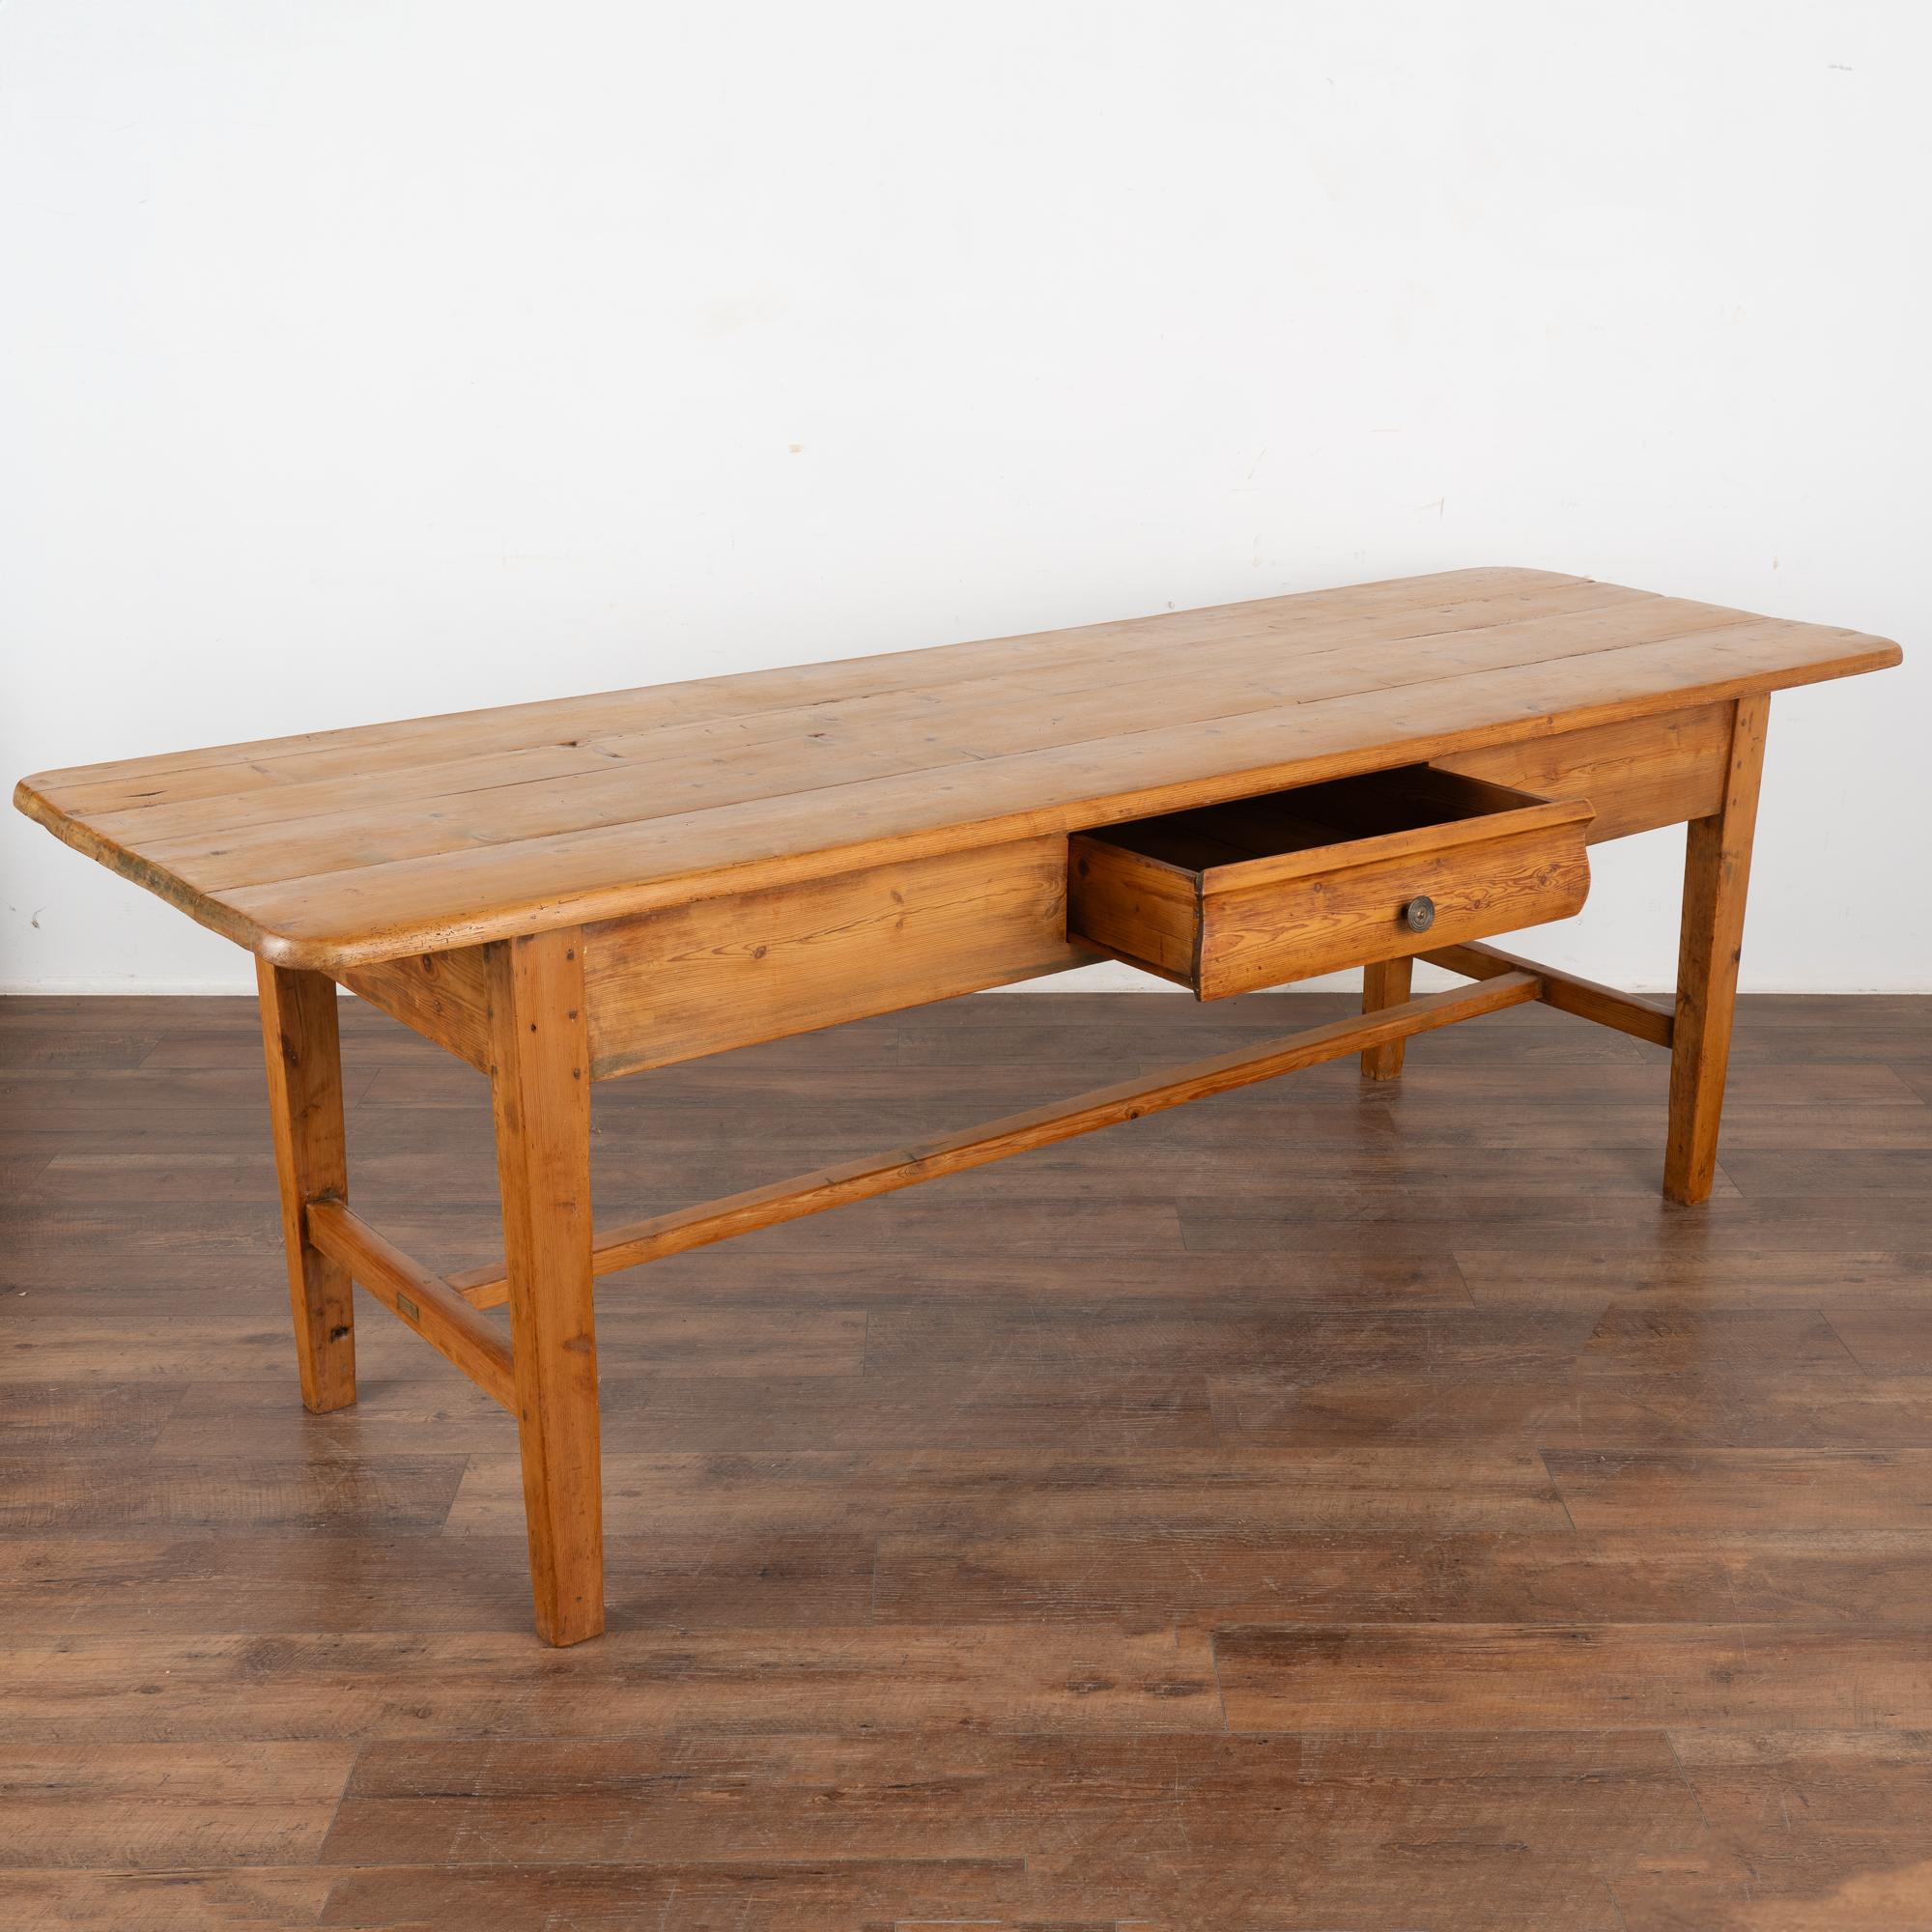 Country Pine Farm Table With Single Drawer, Sweden circa 1840 For Sale